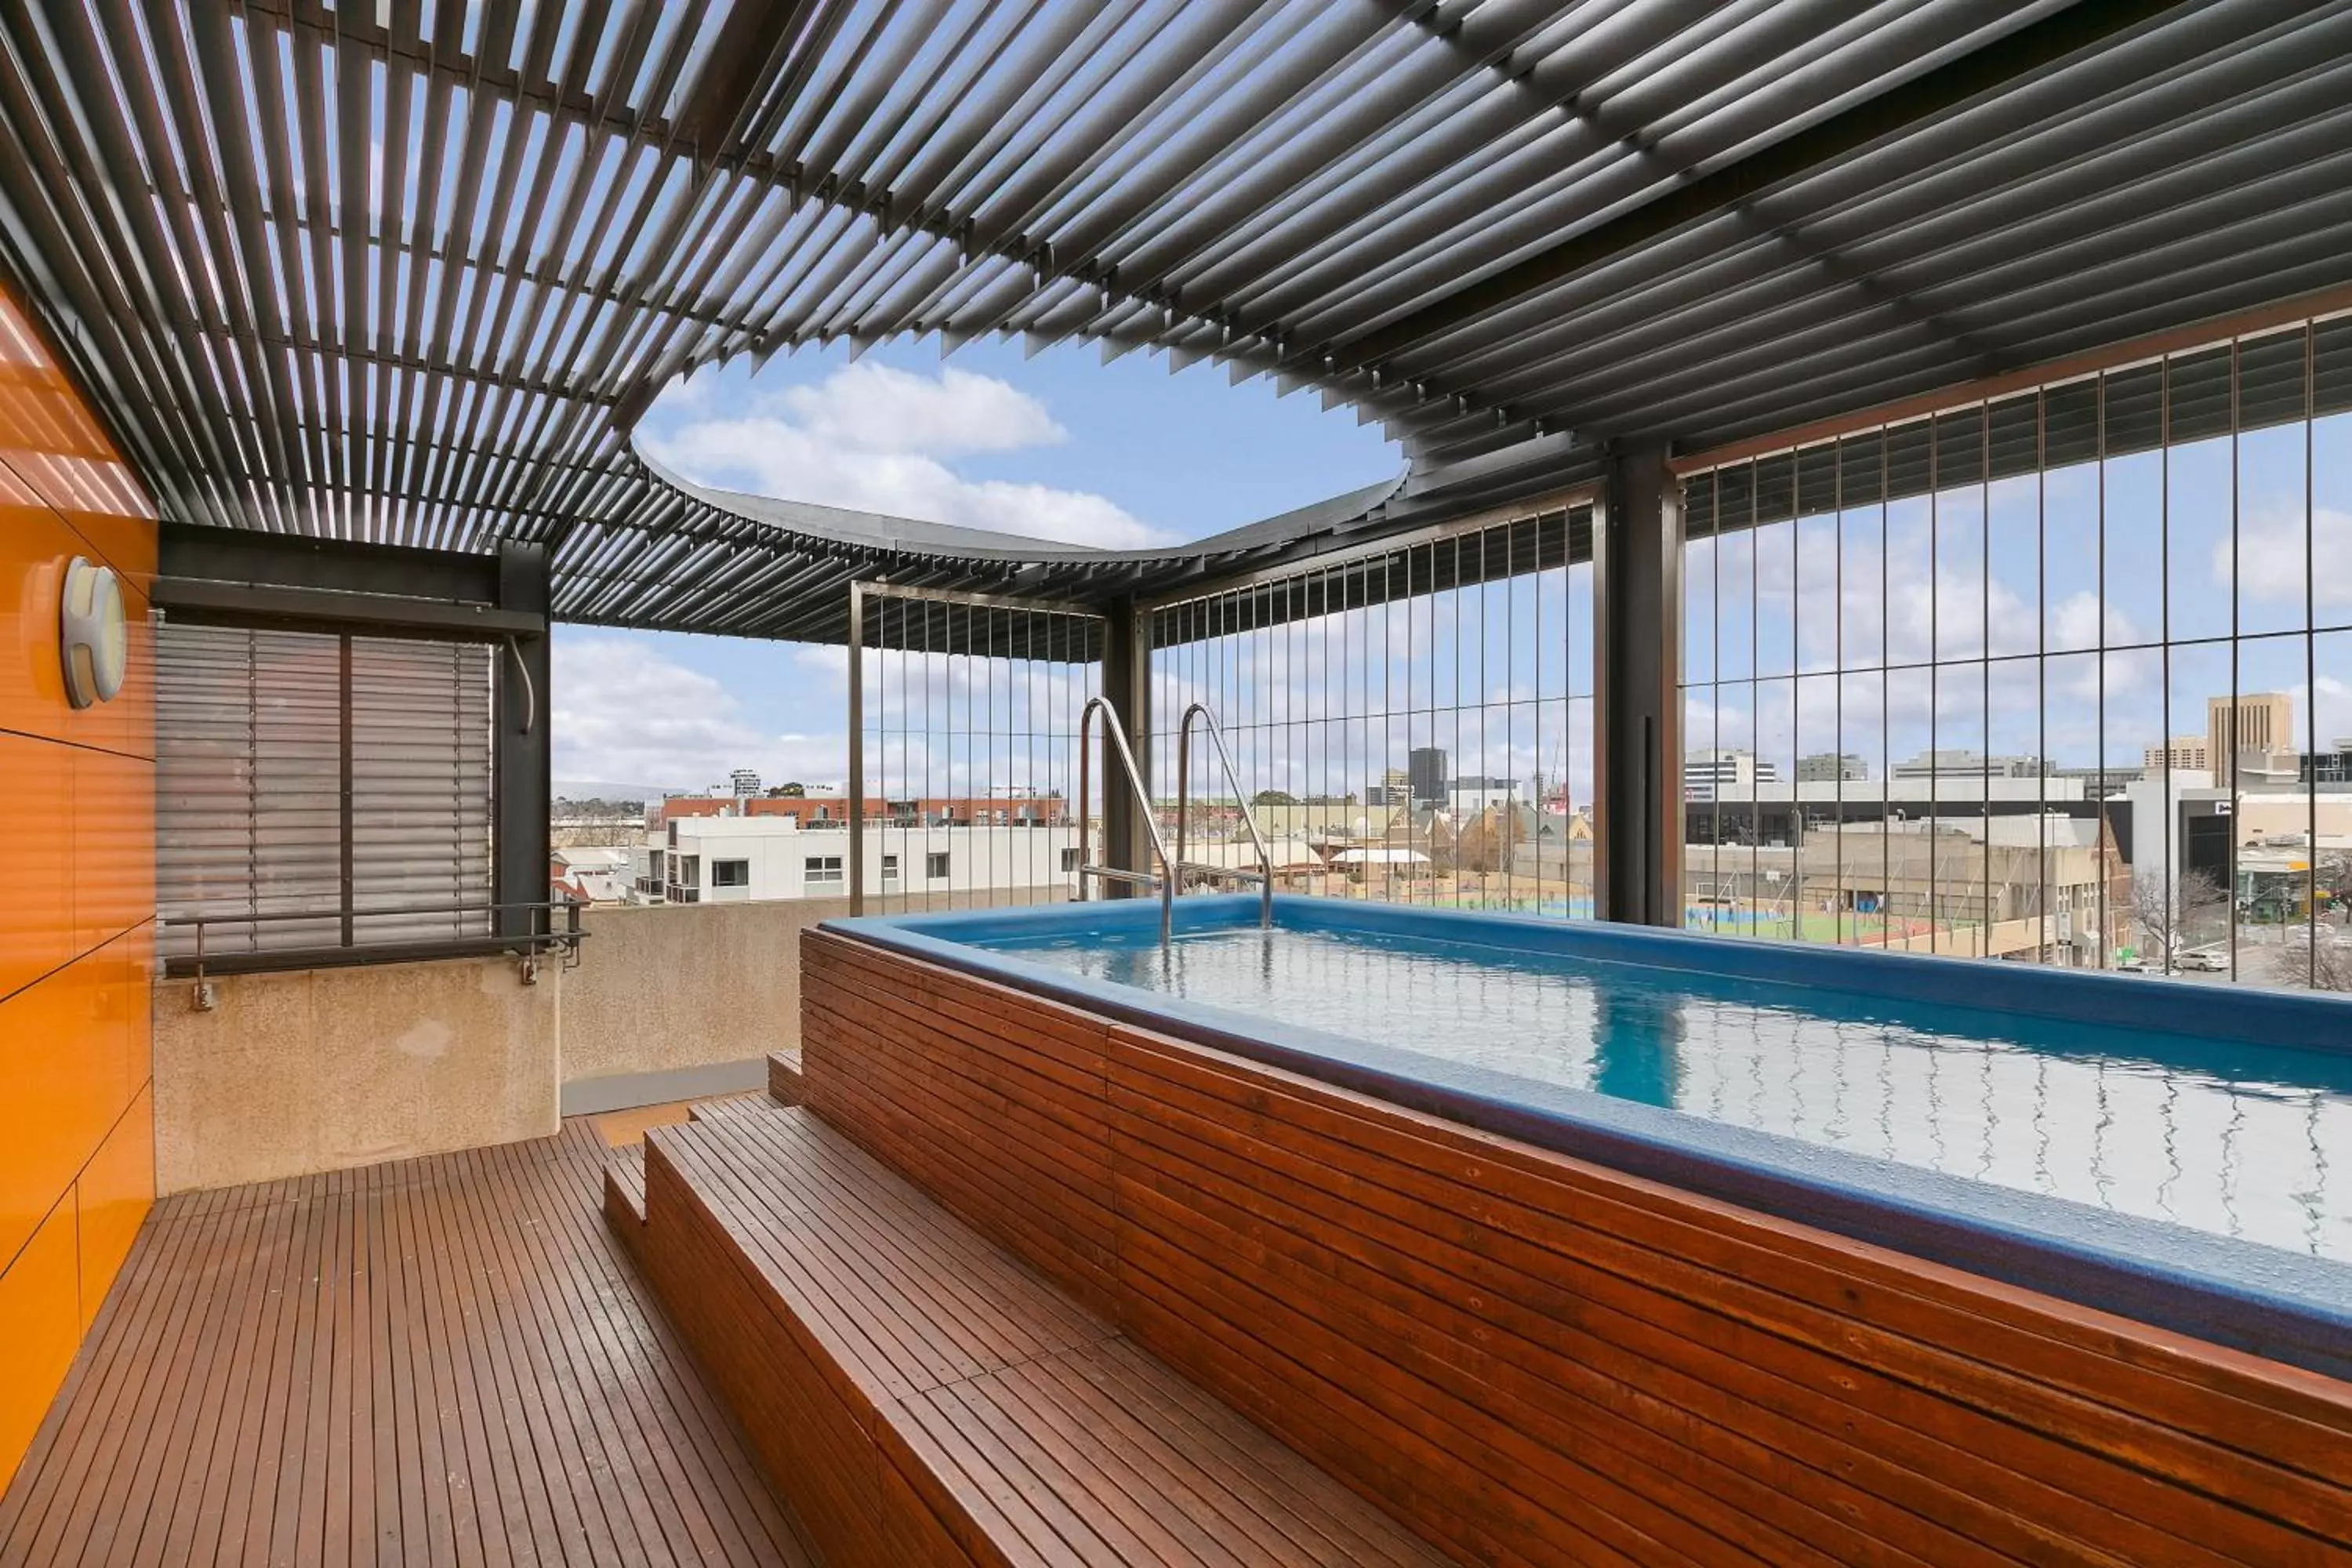 Swimming pool in The Soho Hotel, Ascend Hotel Collection